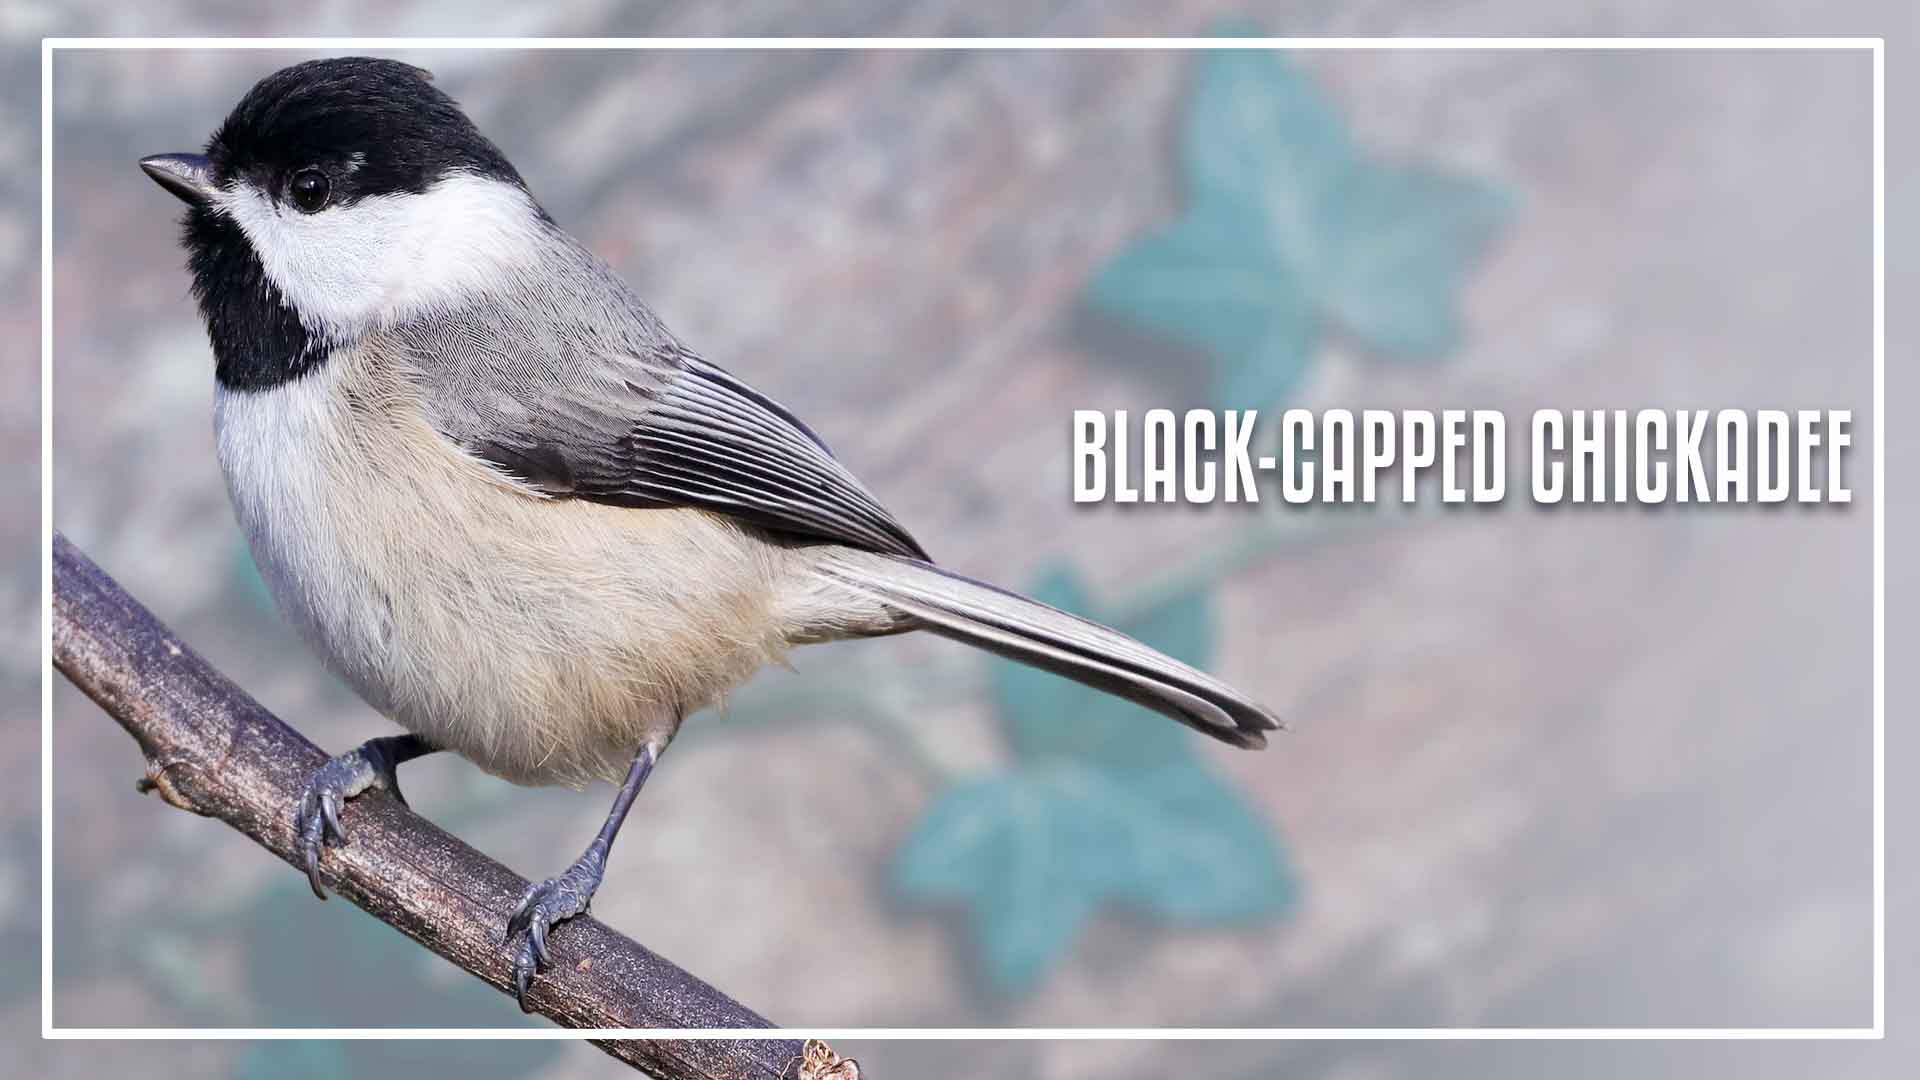 Types of Tit bird is a Black-capped Chickadee